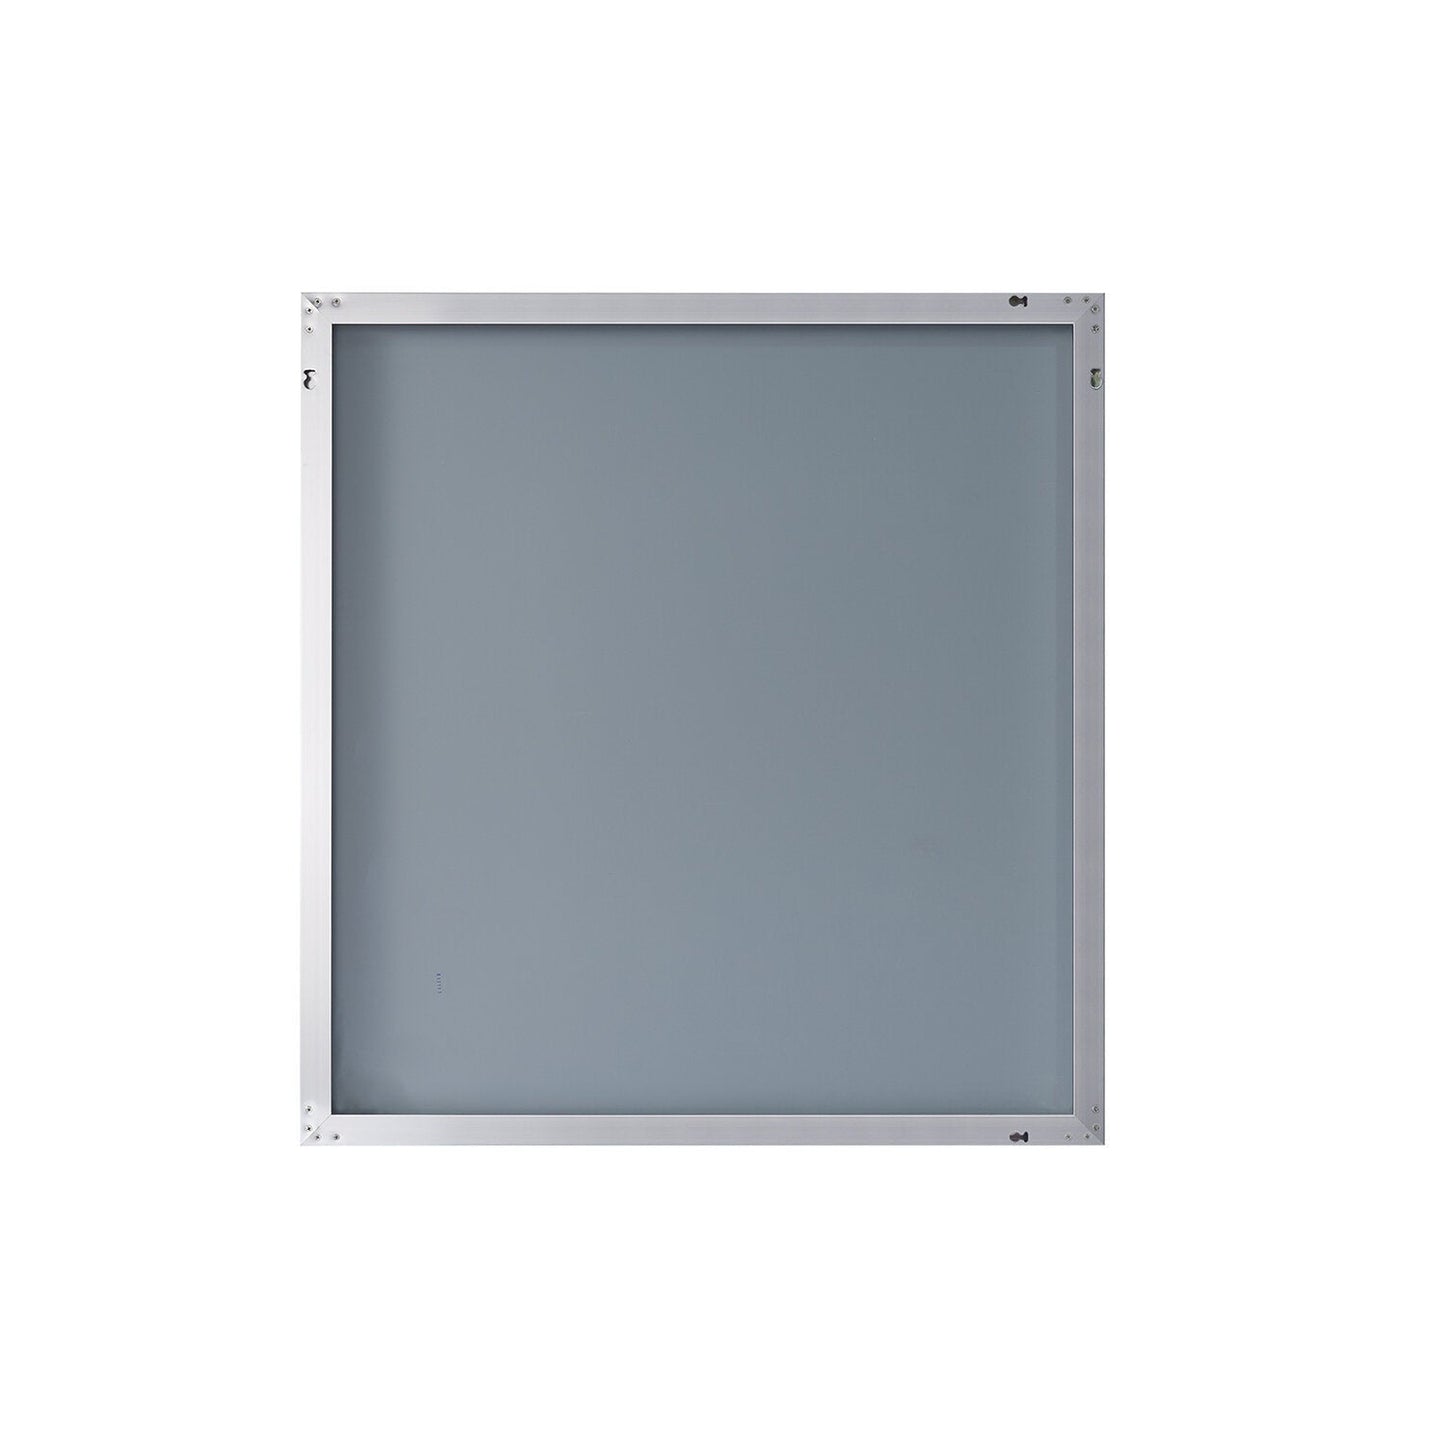 Luxaar Nuovo 34" x 36" Polished Chrome Wall-Mounted Framed Mirror